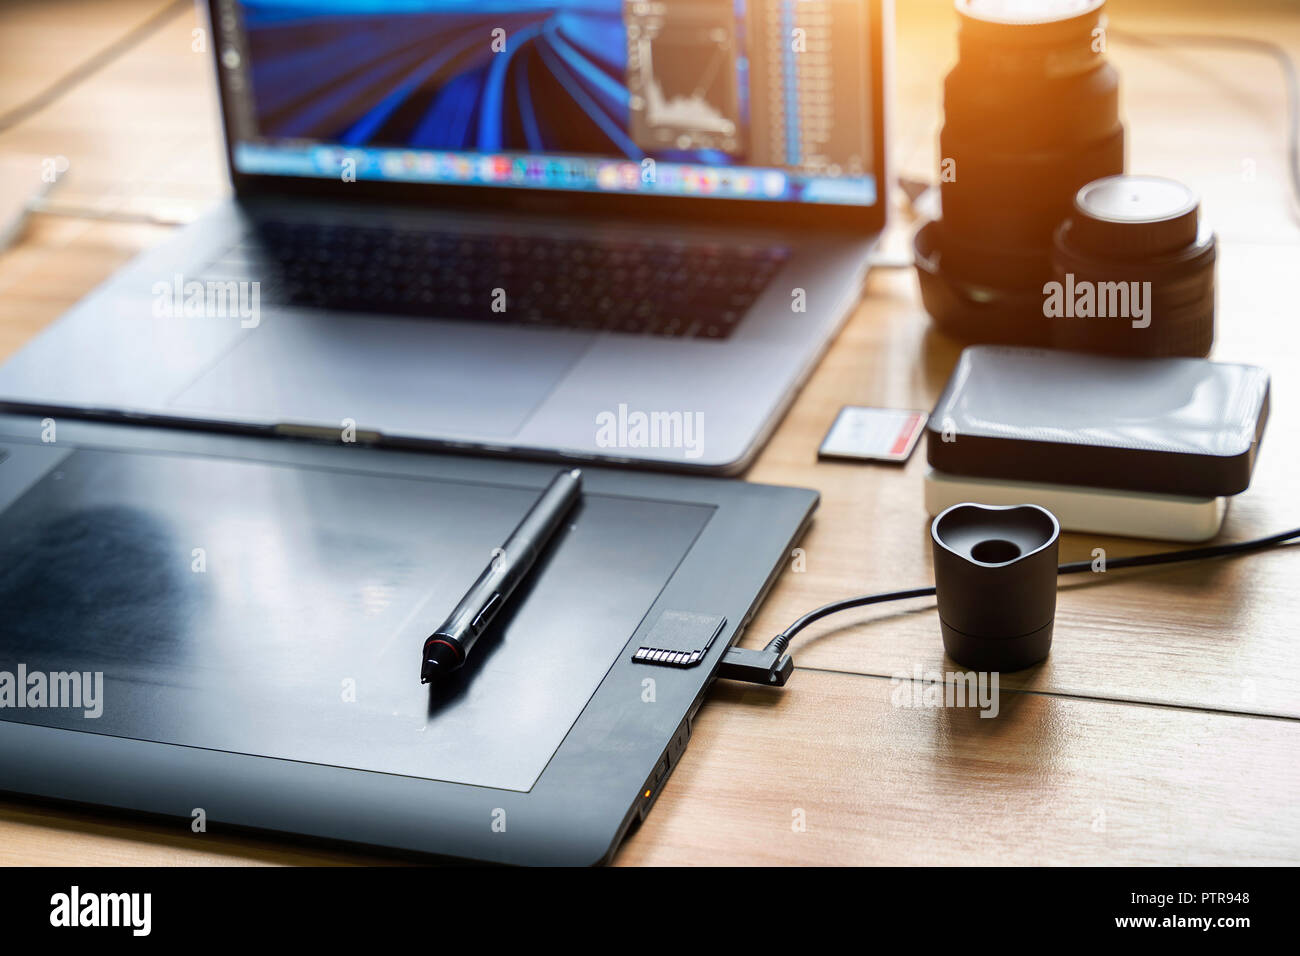 Drawing tablet and laptop computer, harddisk, memory card, camera lens on table. Photographer concept. Stock Photo